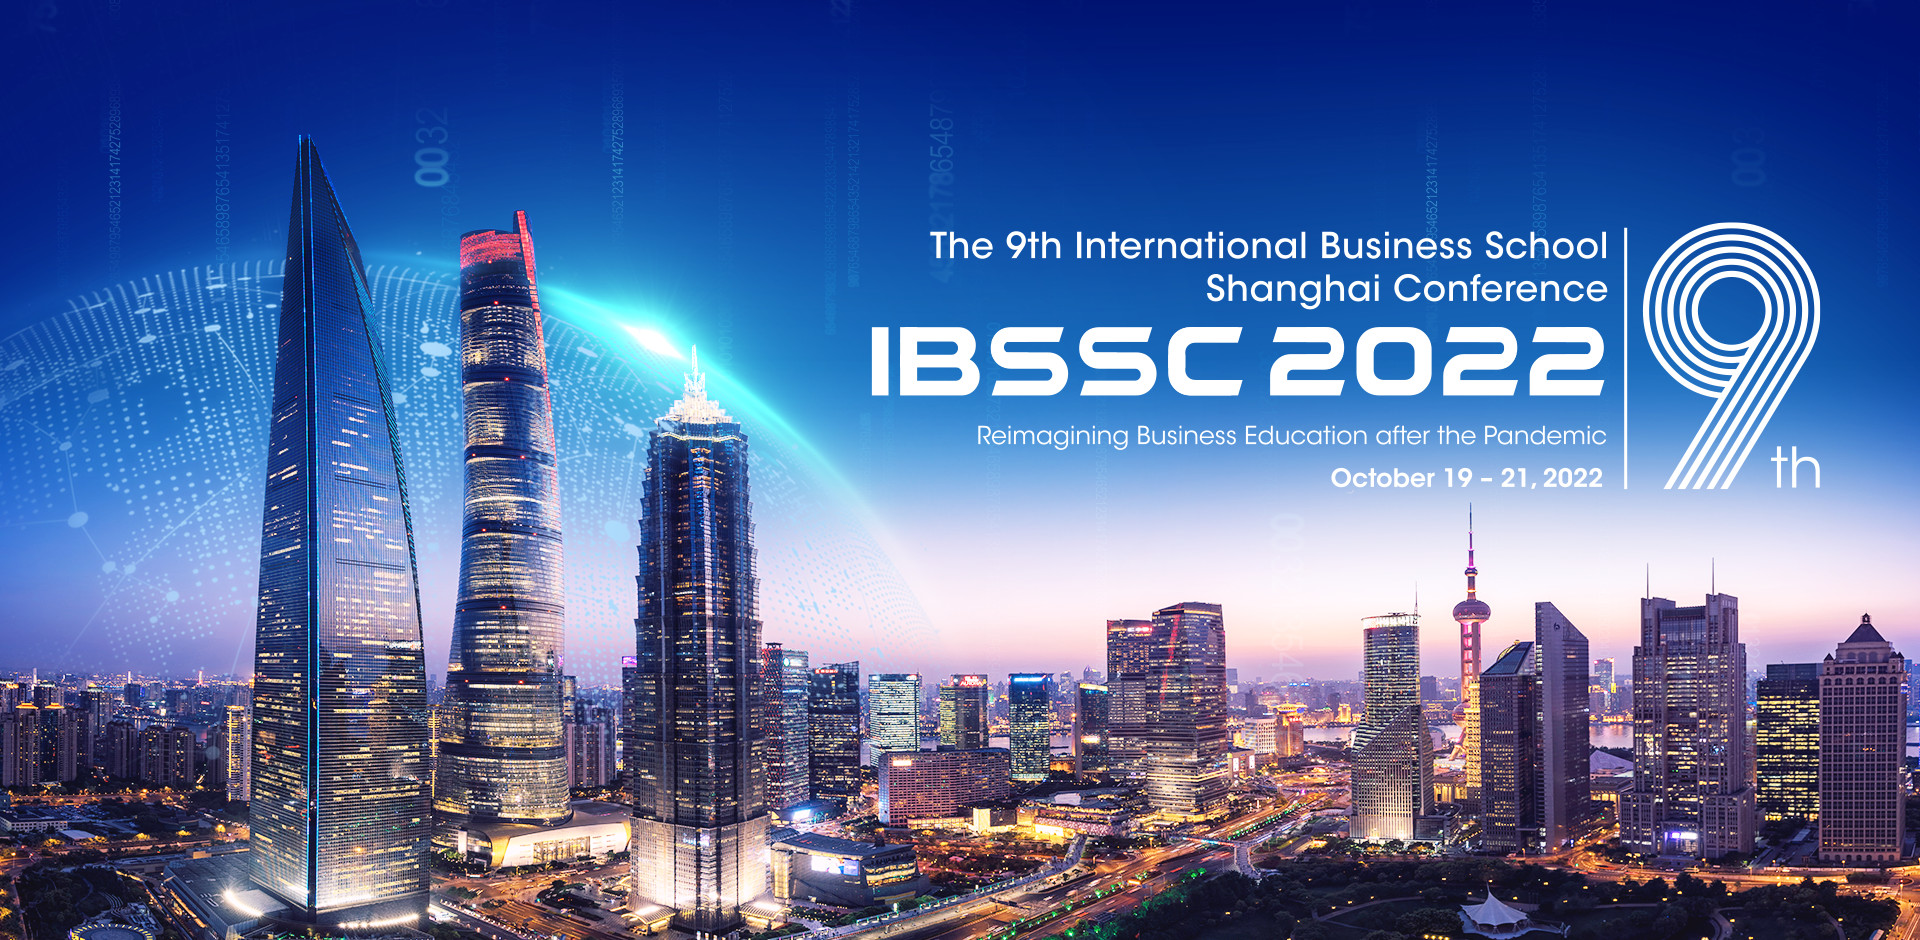 The 2022 International Business School Shanghai Conference (IBSSC) is Opening in October